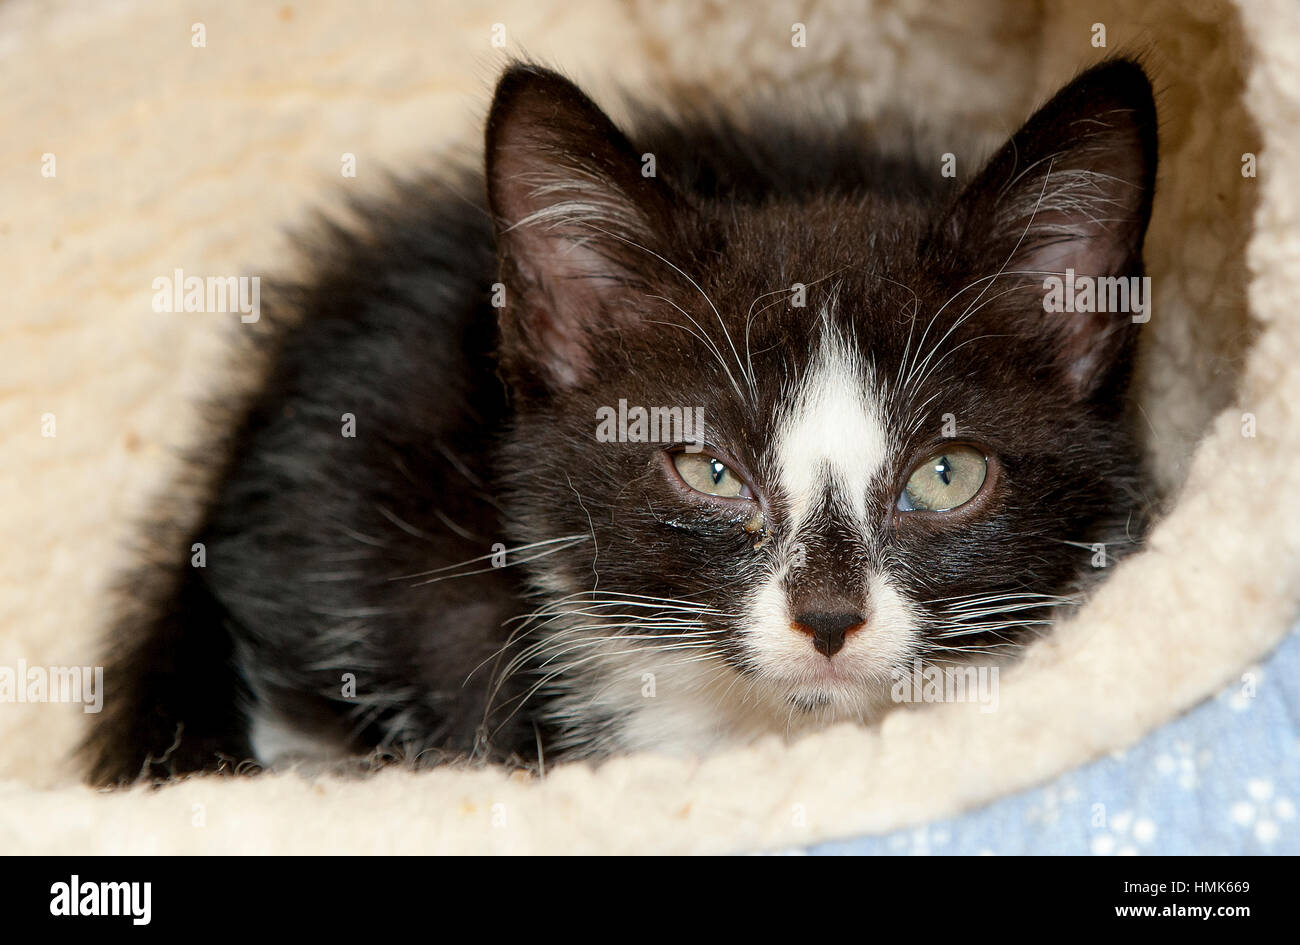 Adorable black and white kitten close up from above looking up at camera Stock Photo